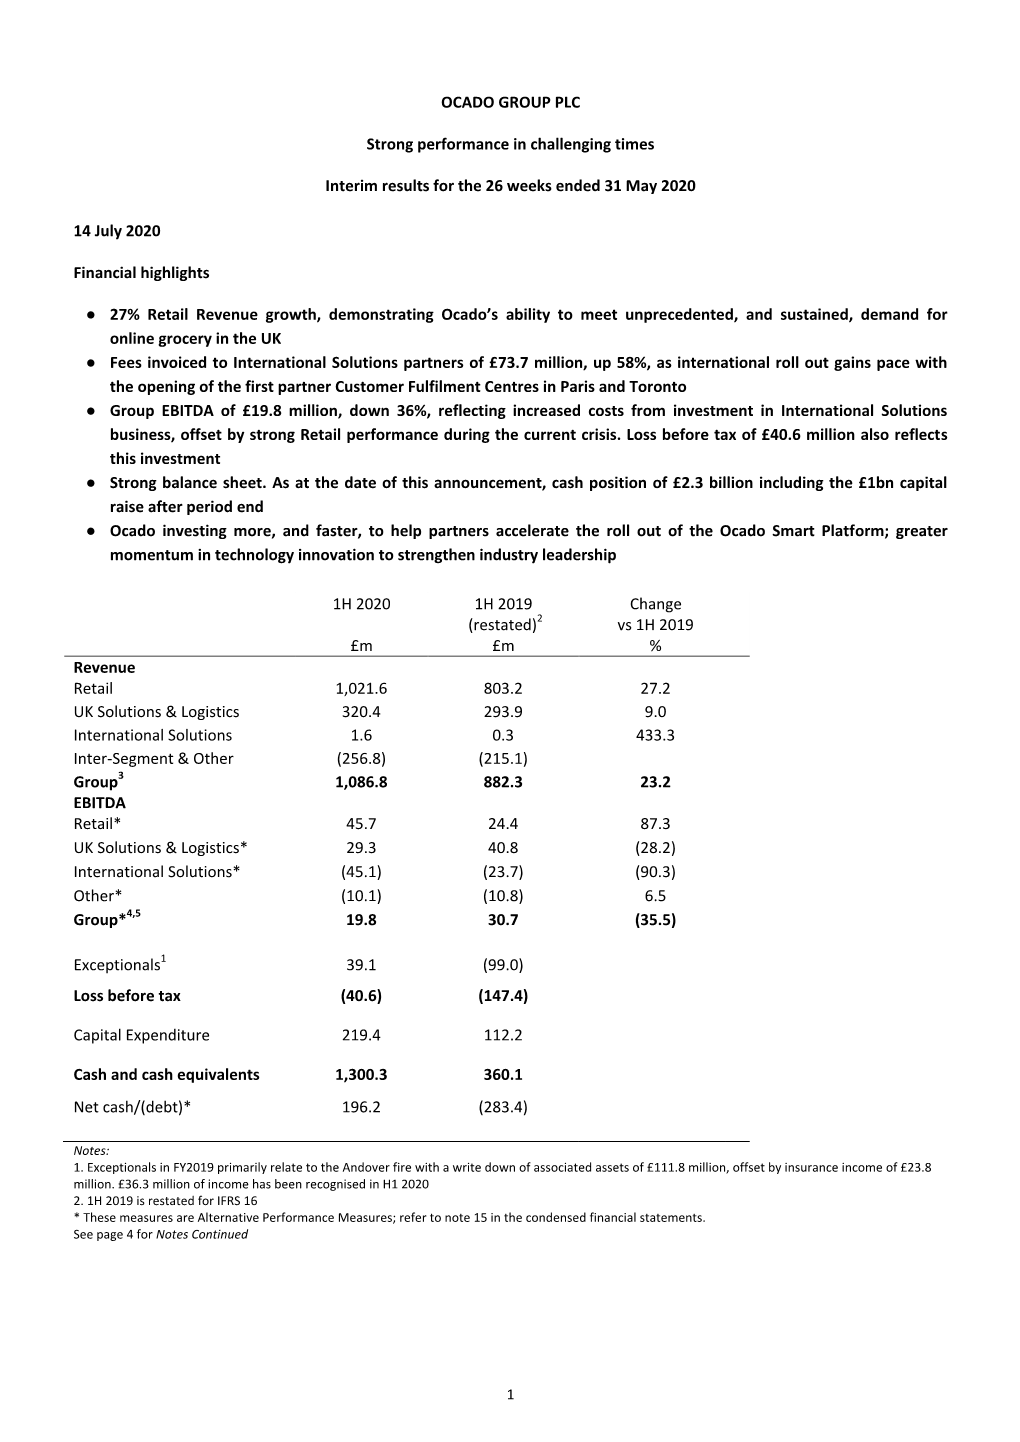 OCADO GROUP PLC Strong Performance in Challenging Times Interim Results for the 26 Weeks Ended 31 May 2020 14 July 2020 Financia